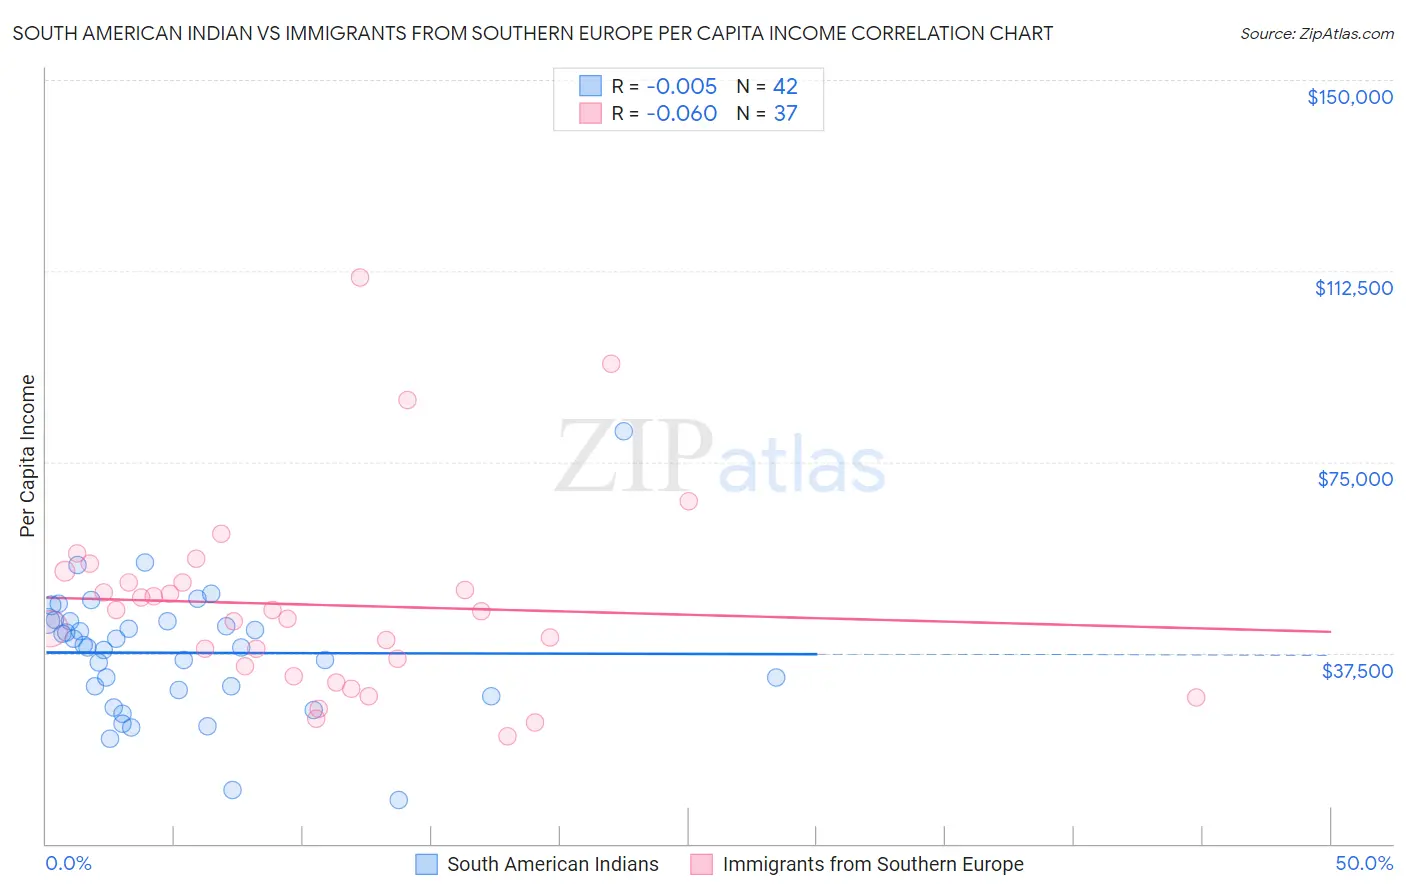 South American Indian vs Immigrants from Southern Europe Per Capita Income